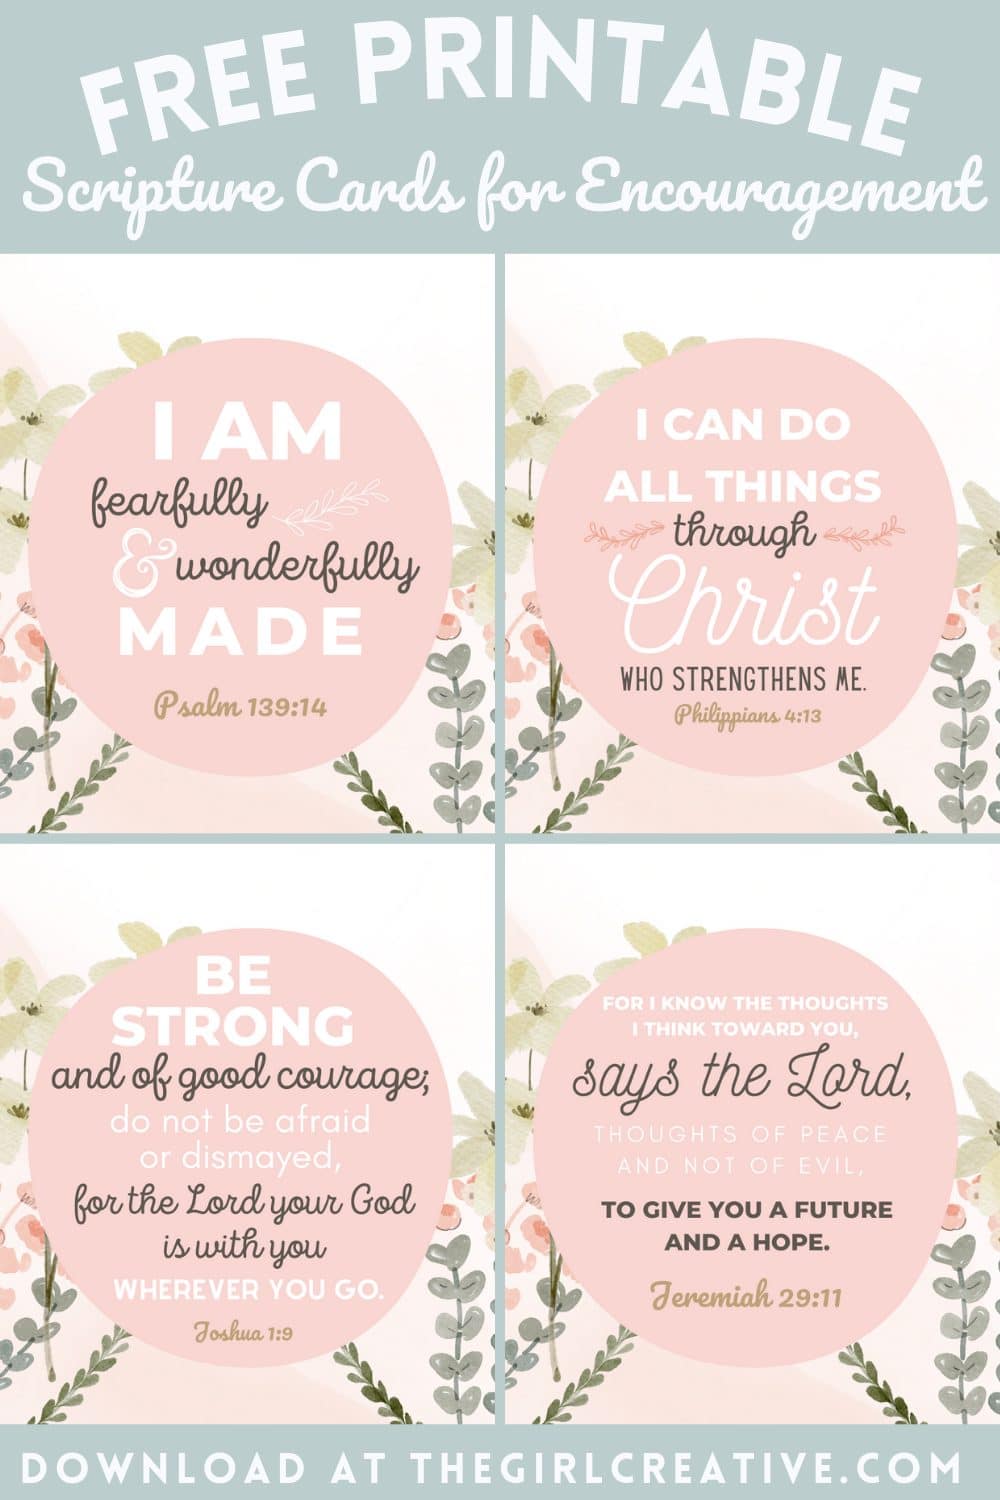 Free Printable Bible Verses
for Encouragement